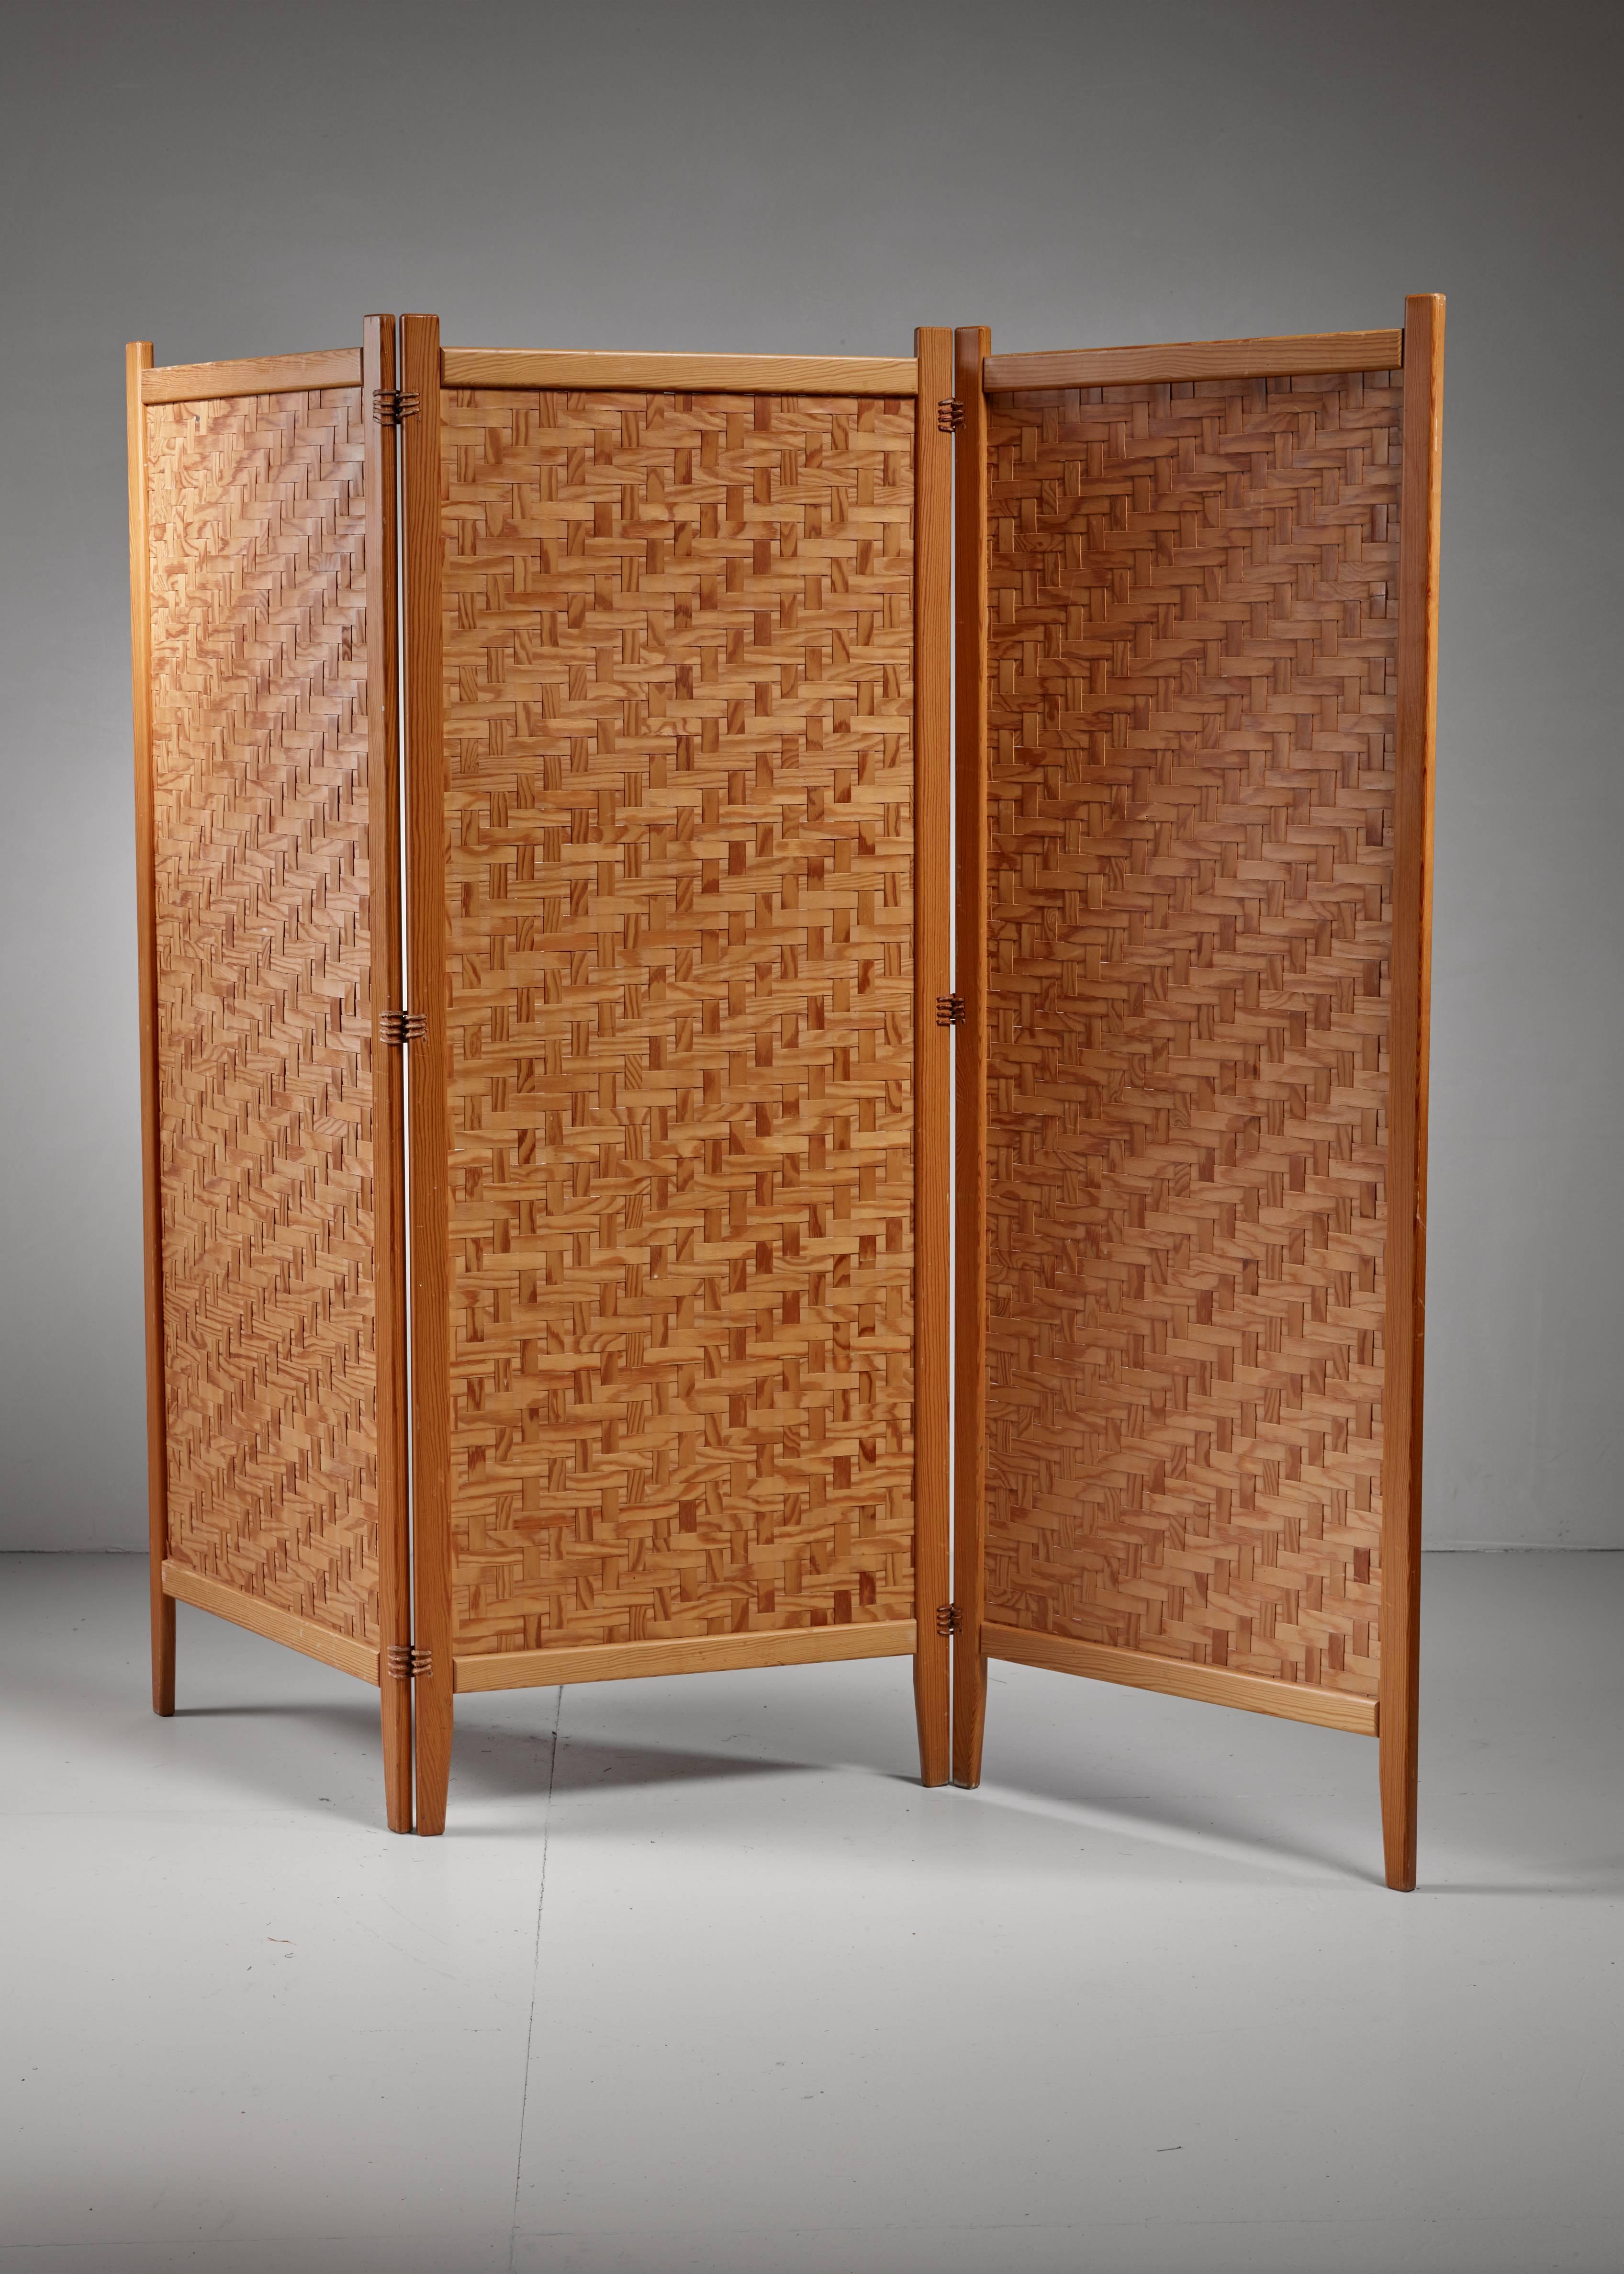 A Swedish folding screen or room divider by Alberts, Tibro. The three-part screen is made of a pine frame with thin, woven pine strips. The three panels are connected with leather strings.